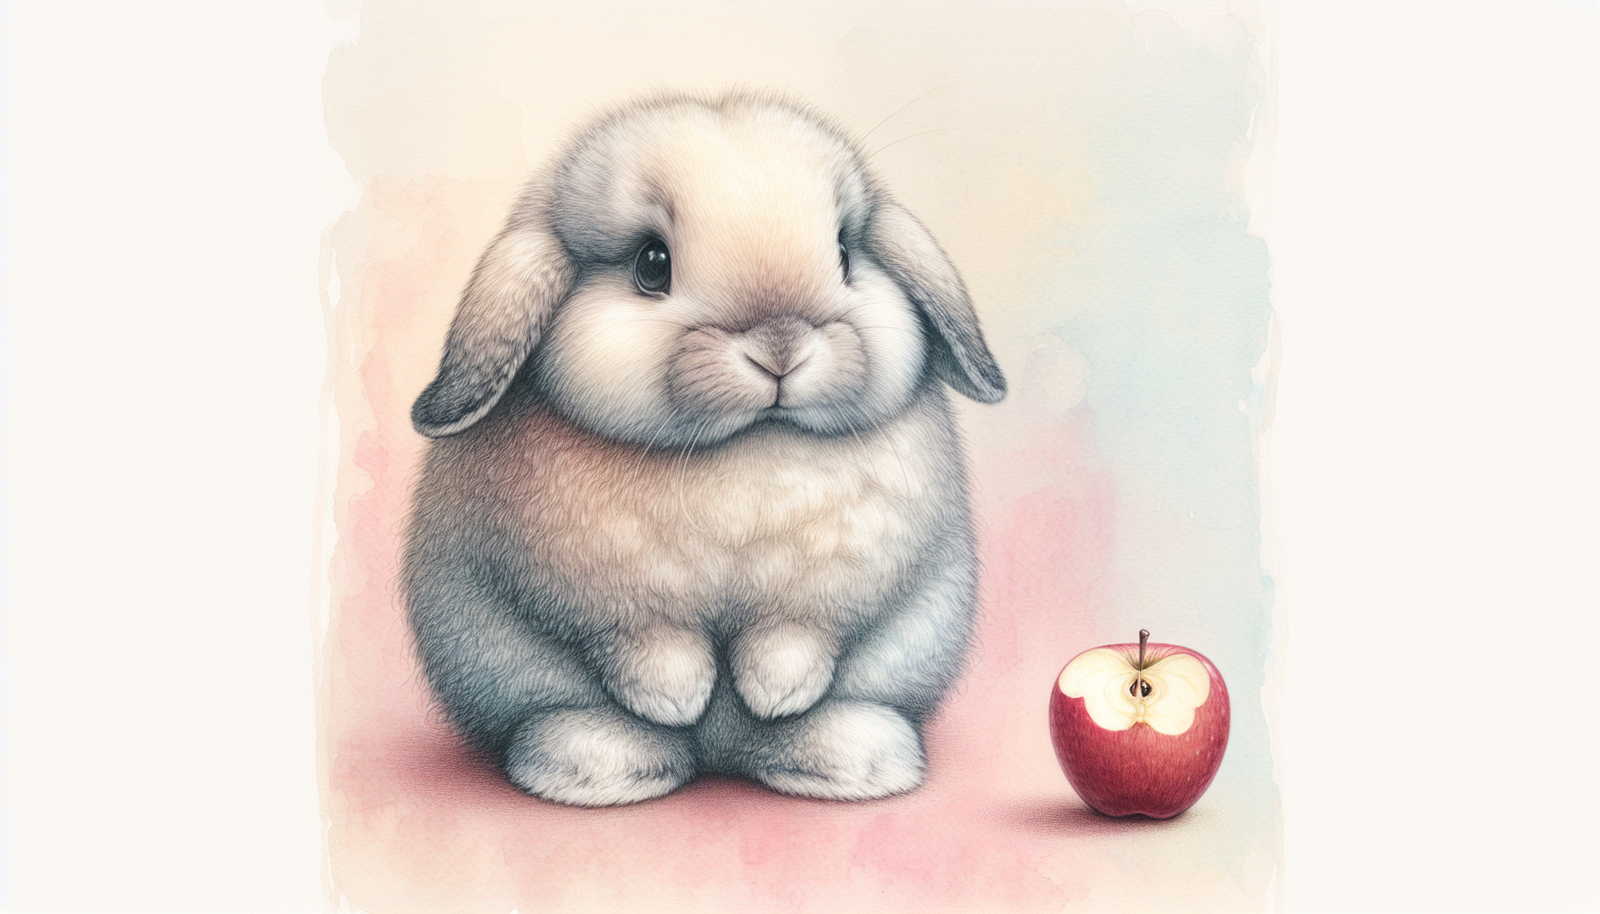 Illustration of a rabbit with a small portion of apple